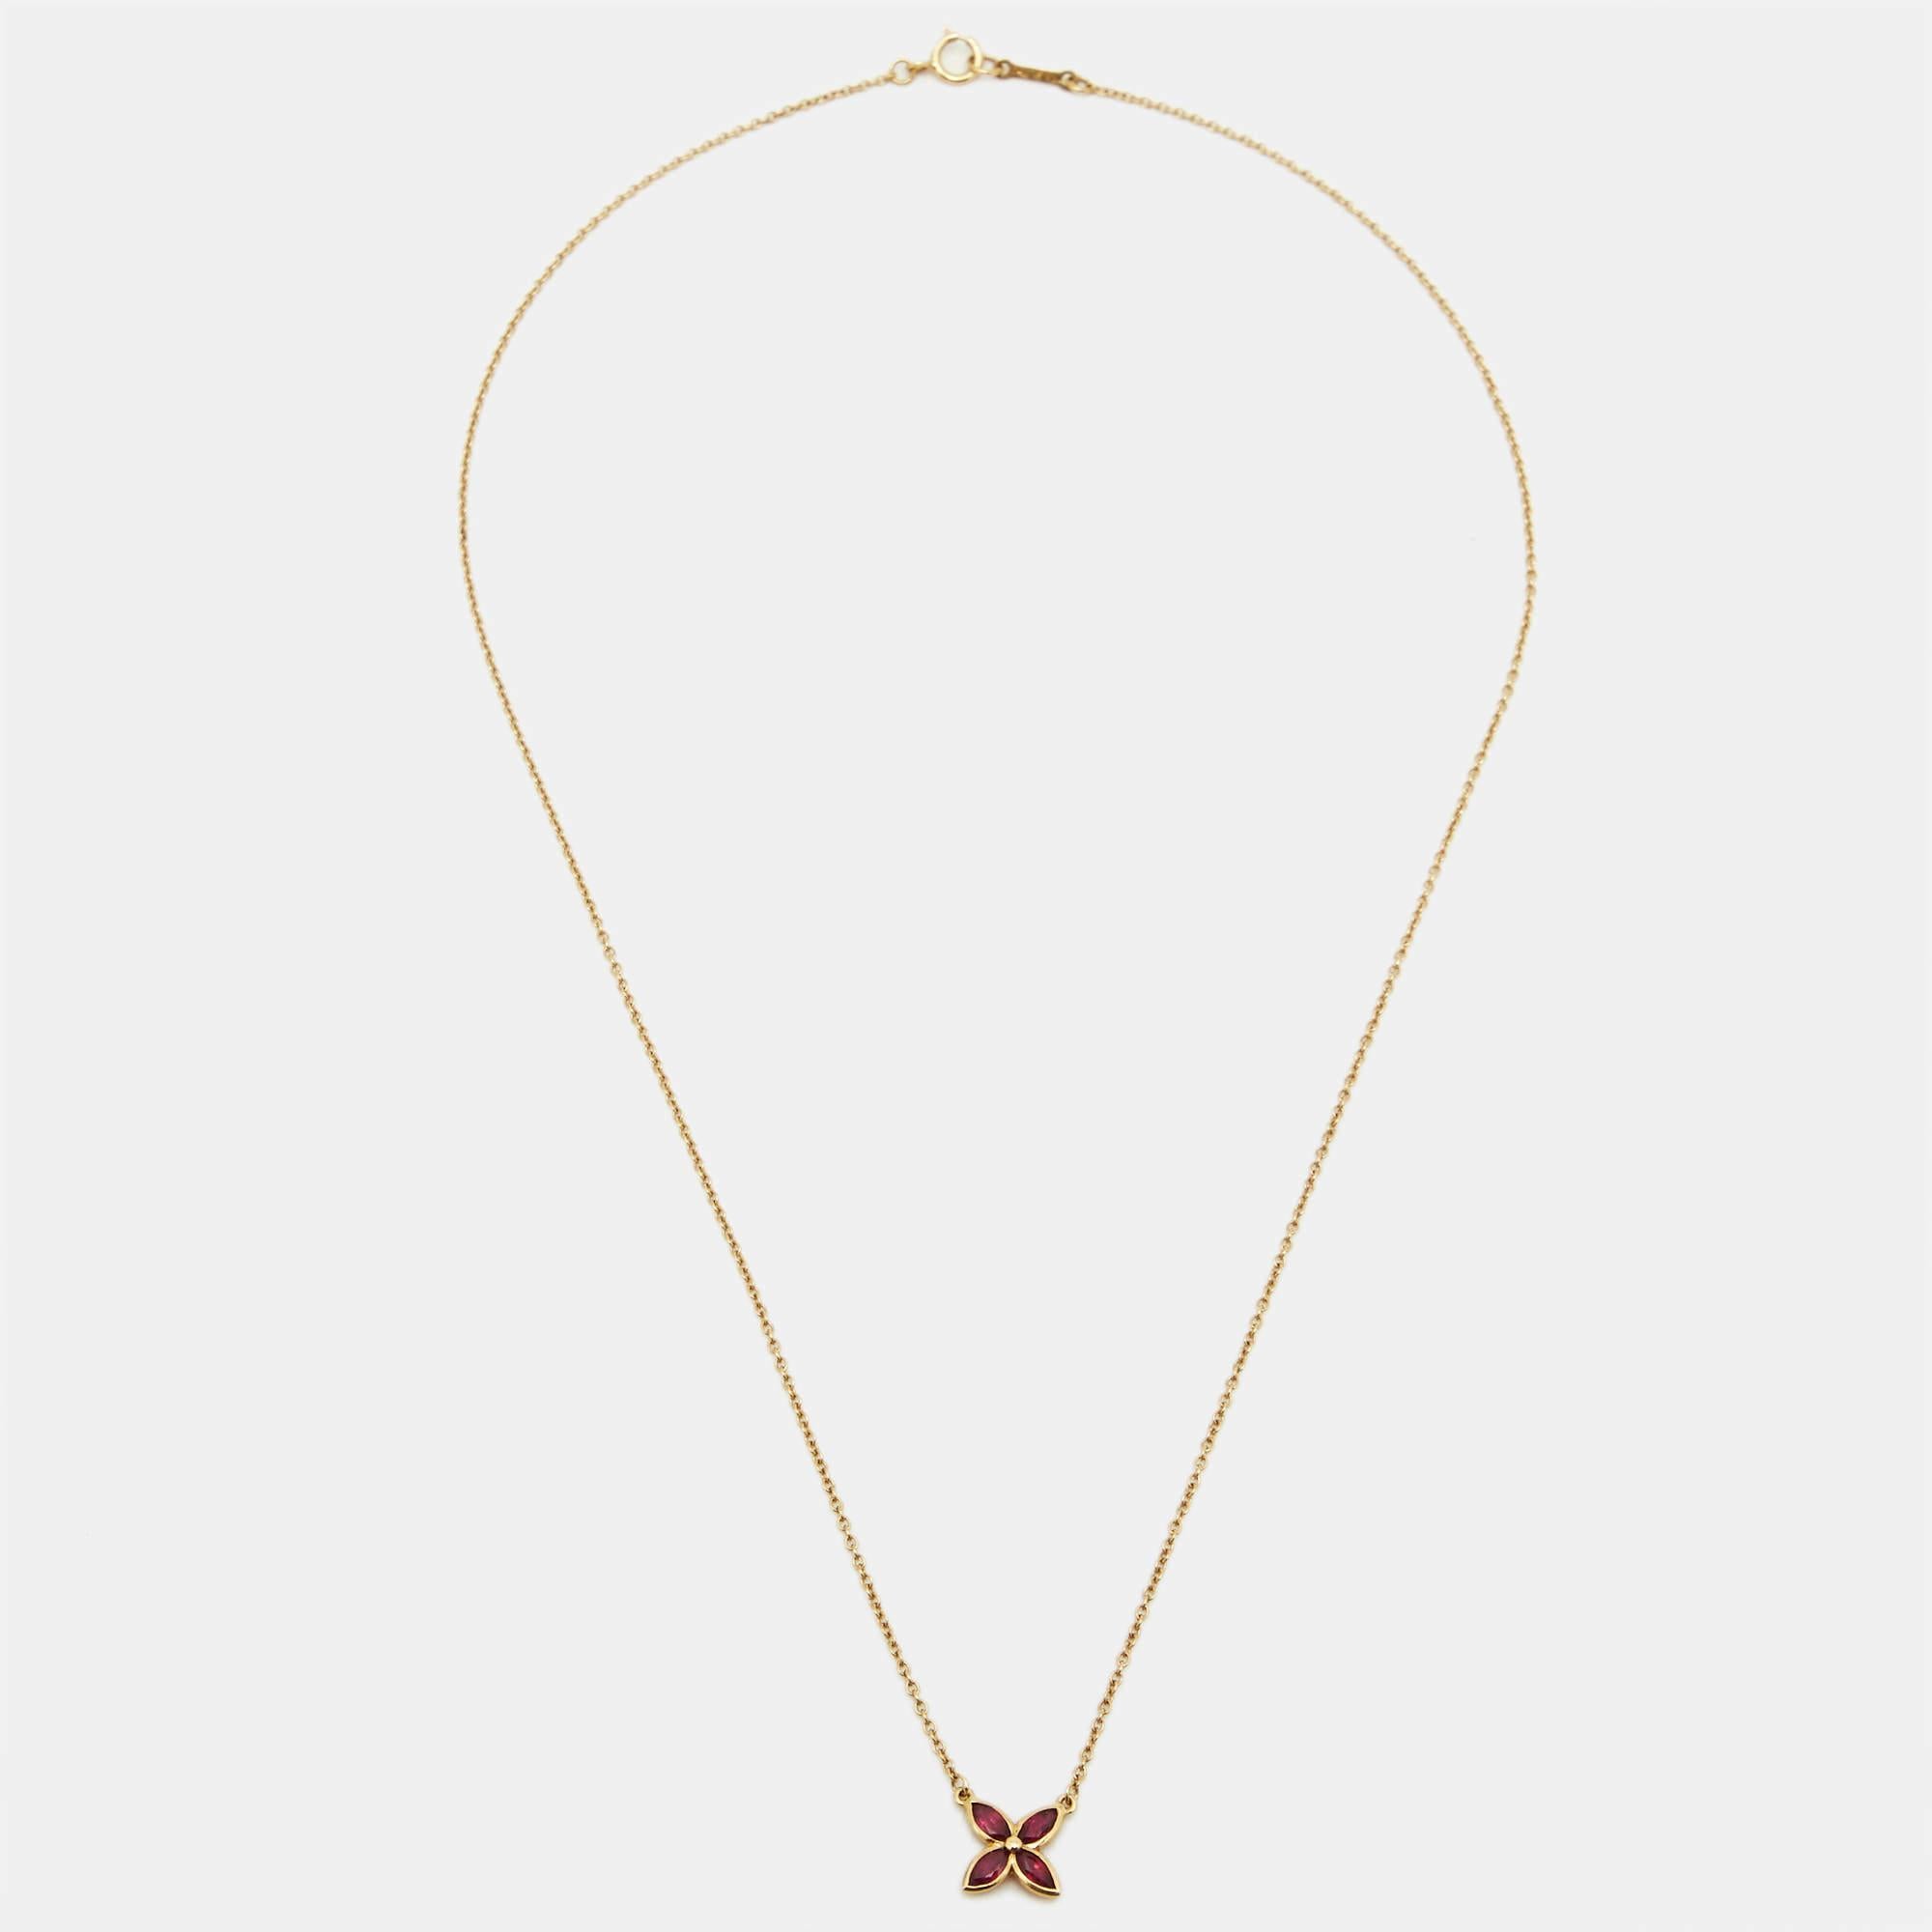 The Tiffany & Co. Victoria necklace is a stunning piece of jewelry that exudes elegance. Crafted from luxurious 18k yellow gold, the necklace features a series of meticulously cut rubies set in a delicate pattern, reminiscent of a timeless and regal